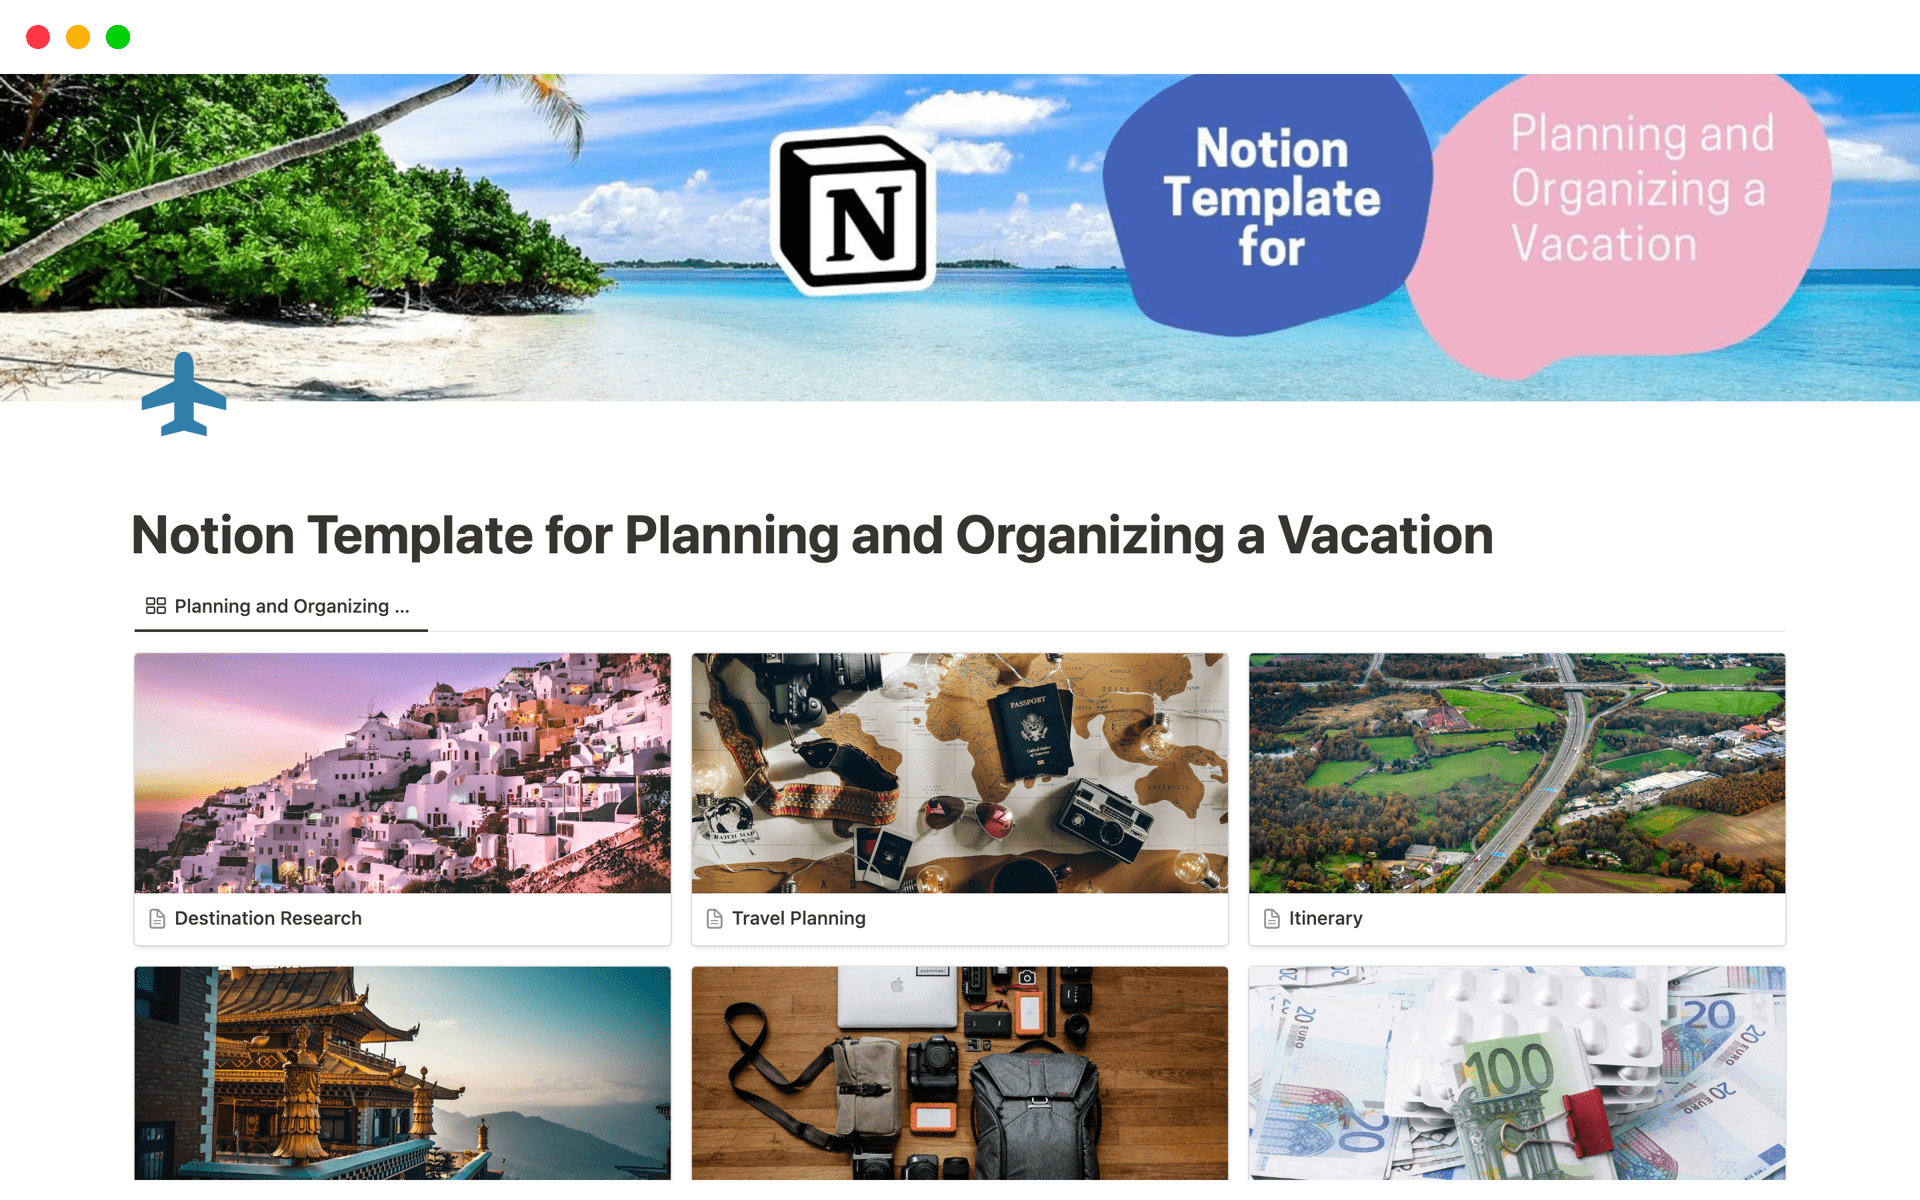 Embarking on a memorable vacation? Look no further than our comprehensive "Notion Template for Planning and Organizing a Vacation."